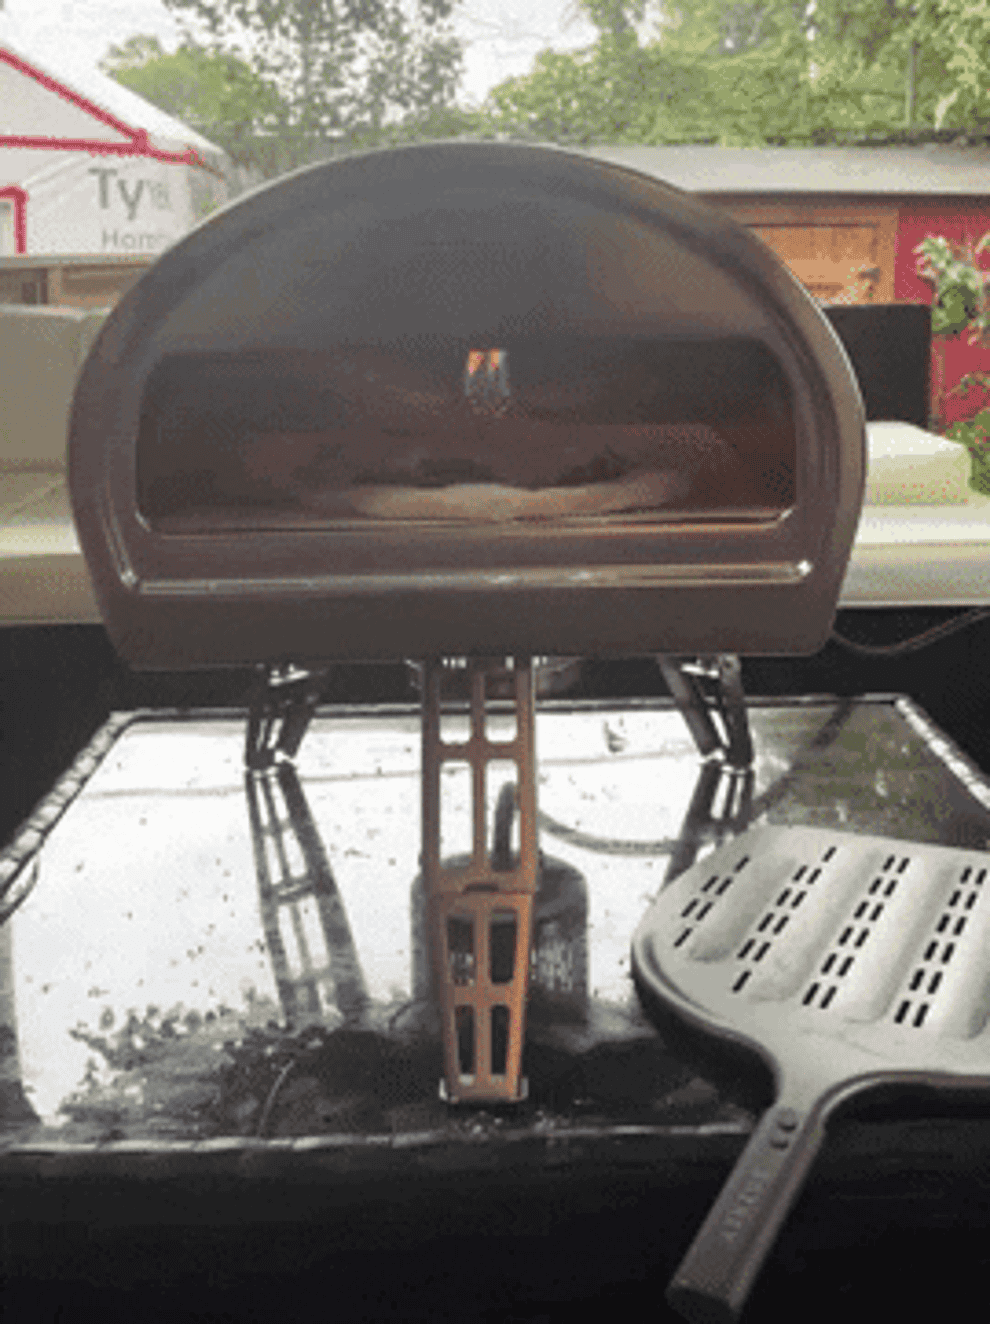 A GIF of a pizza in the oven